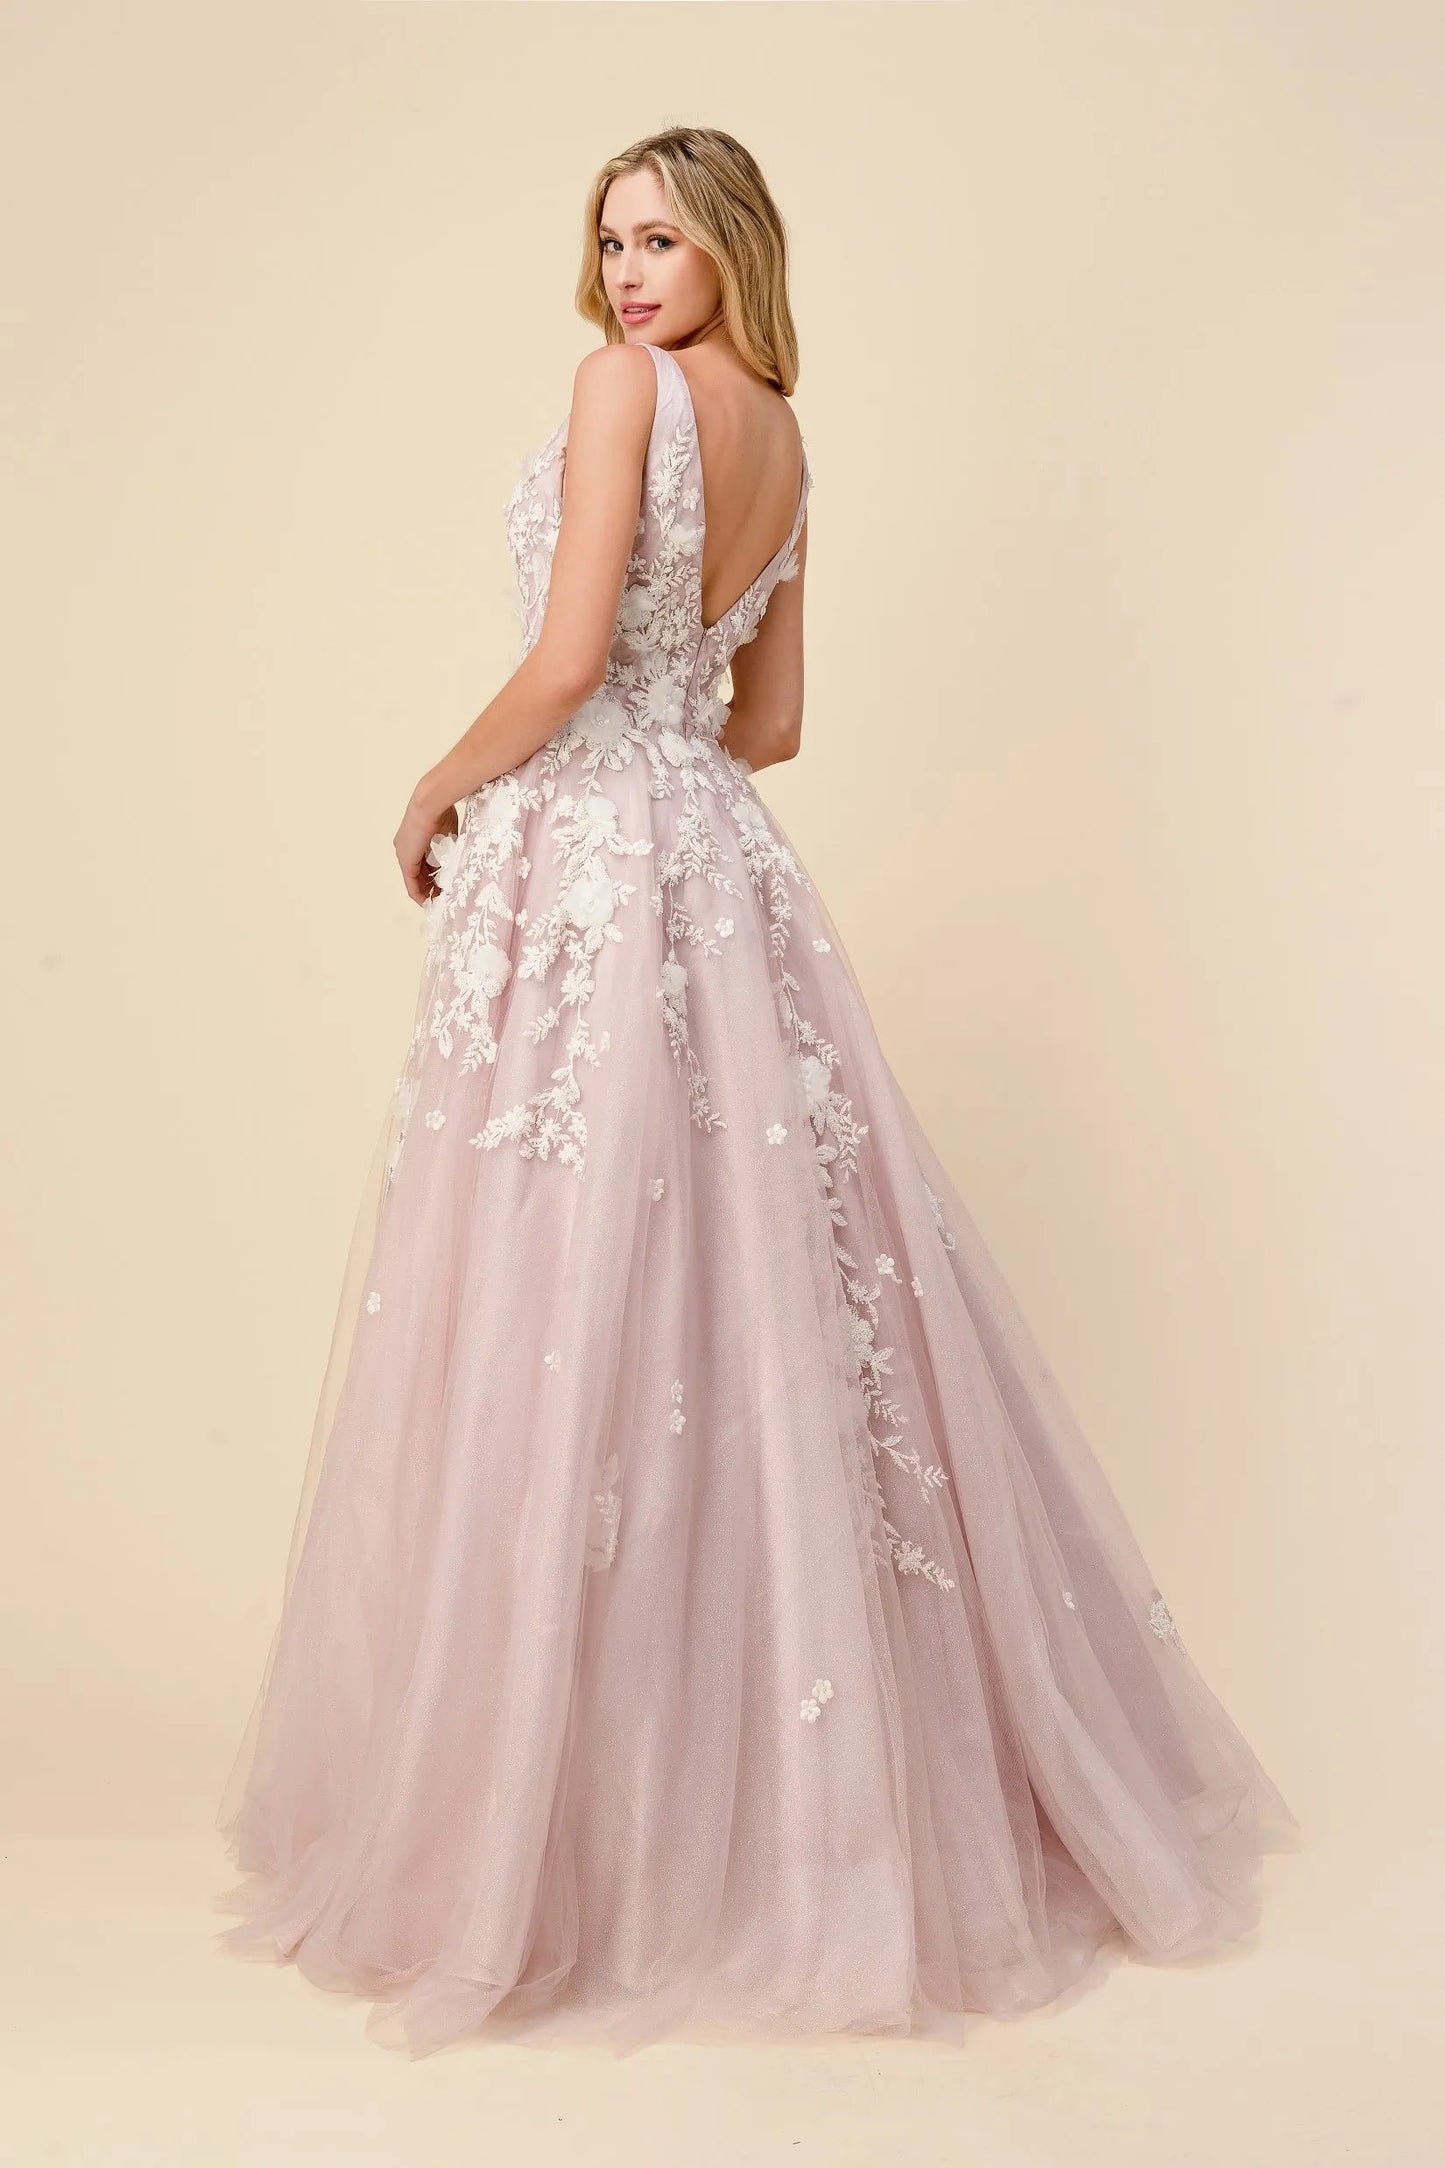 Andrea & Leo Gardenia A1028 Long Shimmer Ball Gown 3D Lace Formal Dress V Neck Gardenia gown is a layered tulle ball gown with floral diamond glitter motif trickling down the gown. 3D organza flowers add couture depth to the garment, while the pastel tone of the dress provides soft backdrop to the floral shimmer. The bodice features a illusion V-neckline with sheer side with deep V-back. The skirt is A-line shape with crinoline to support the silhouette.